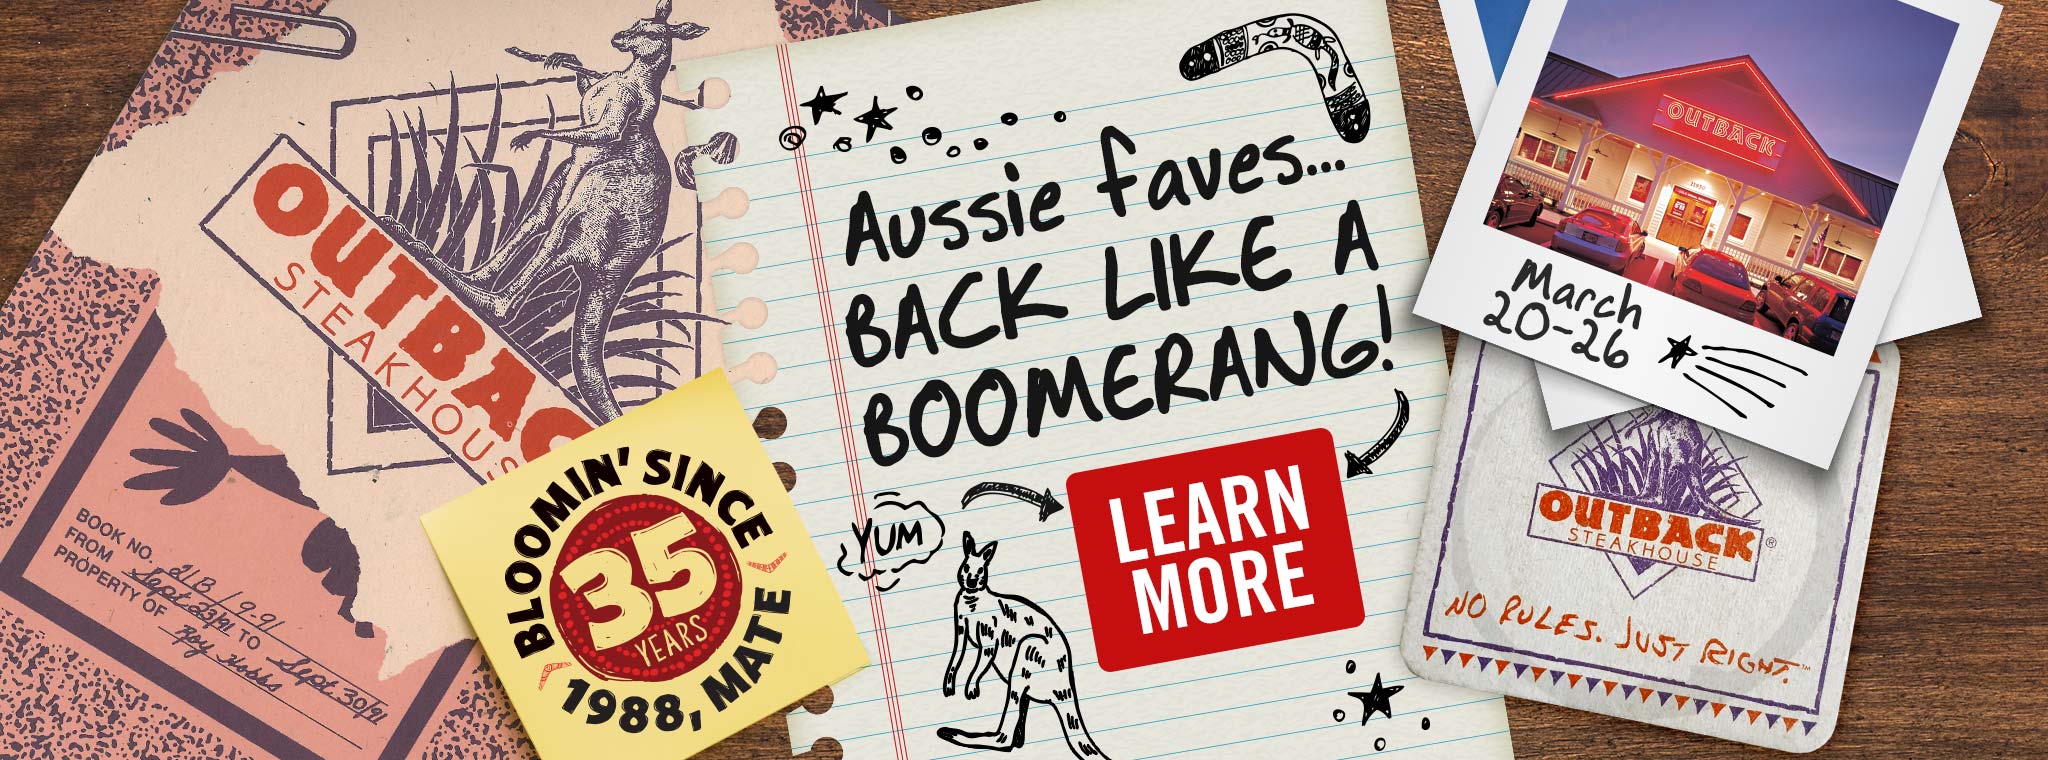 It's our 35th Anniversary and your Aussie faves are BACK LIKE A BOOMERANG! One week only - March 20-26.